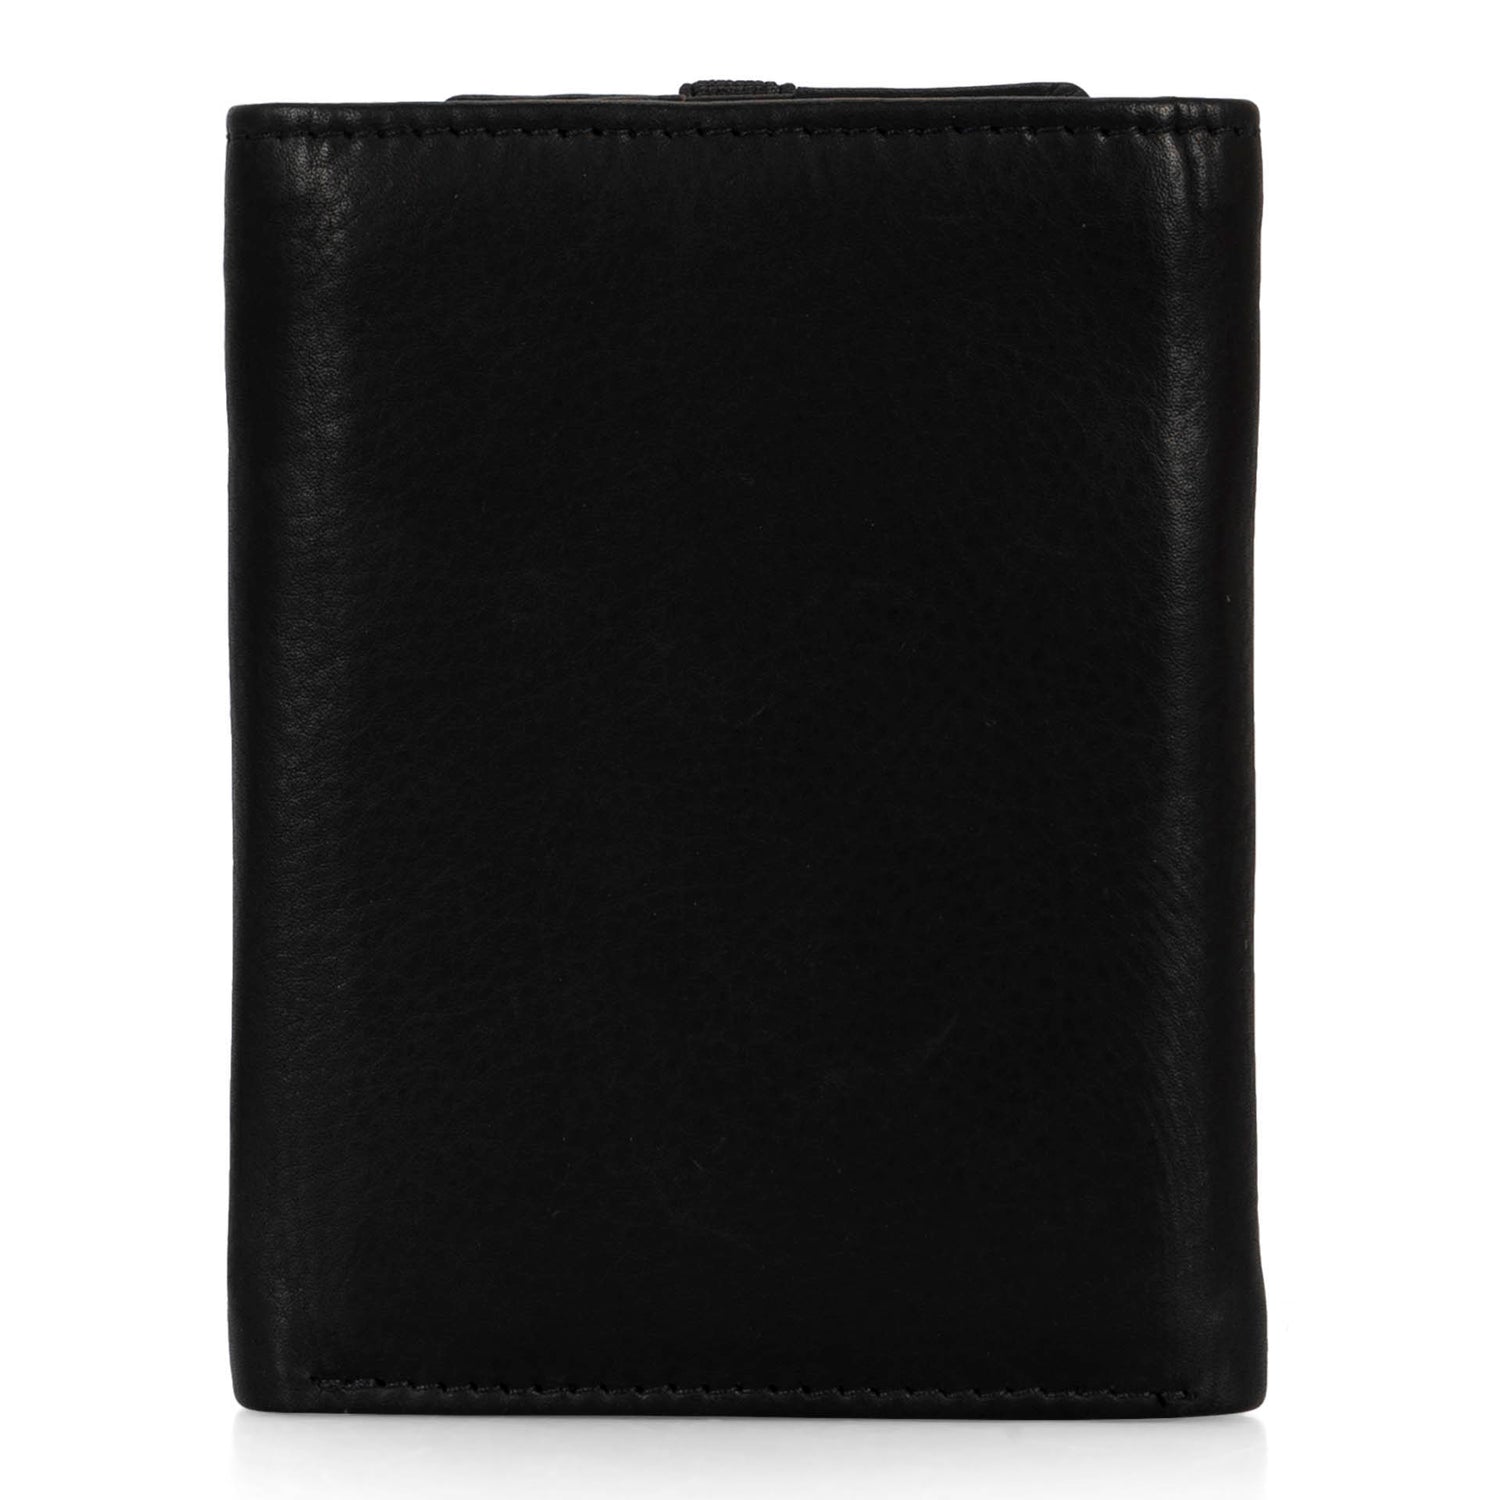 Back view of a black wallet called Hudson designed by Tracker on a white background, showcasing its smooth leather.